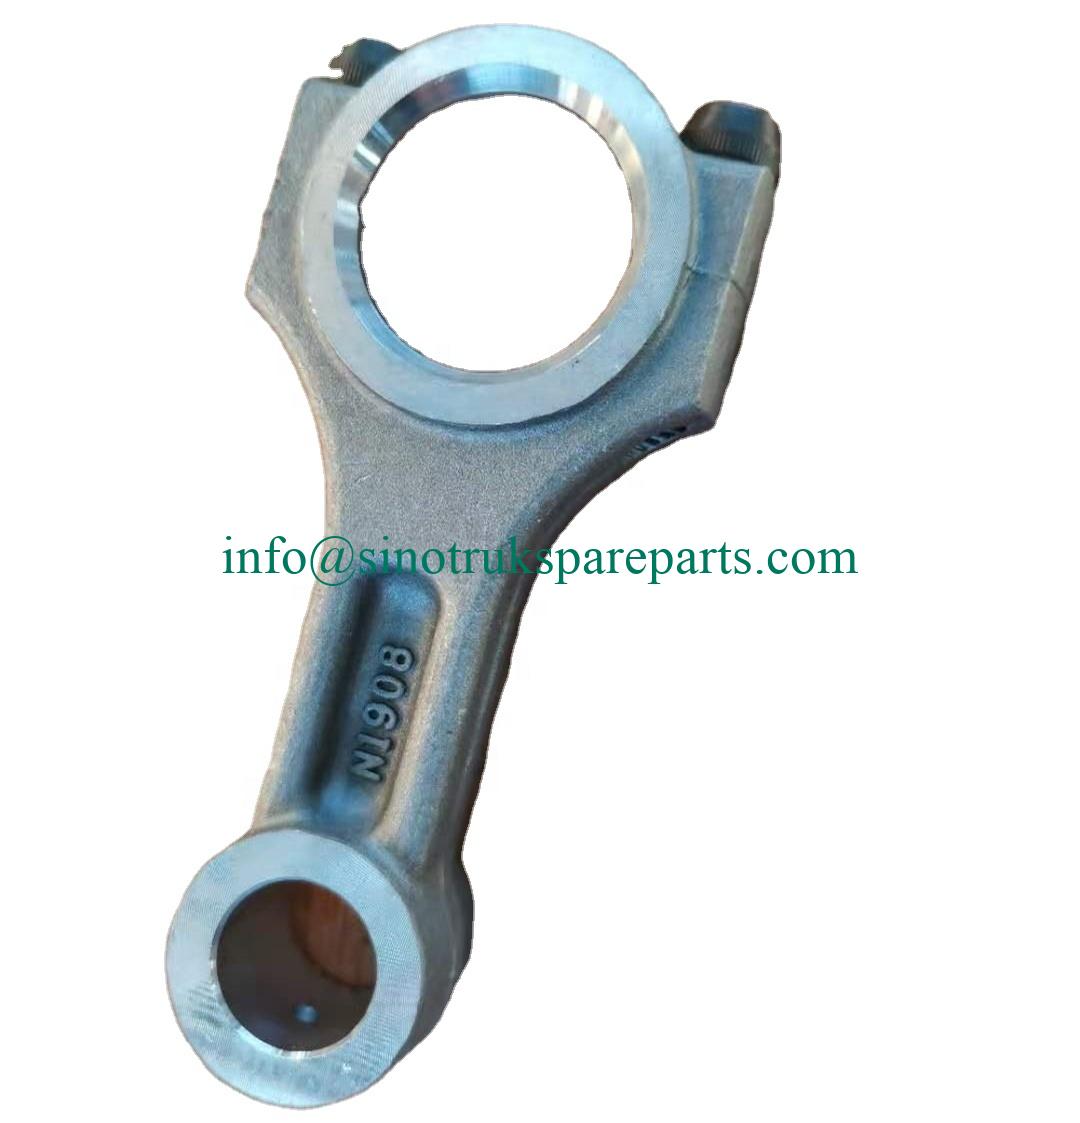 Sinotruk howo Chassis parts Flange Nut 179000320013